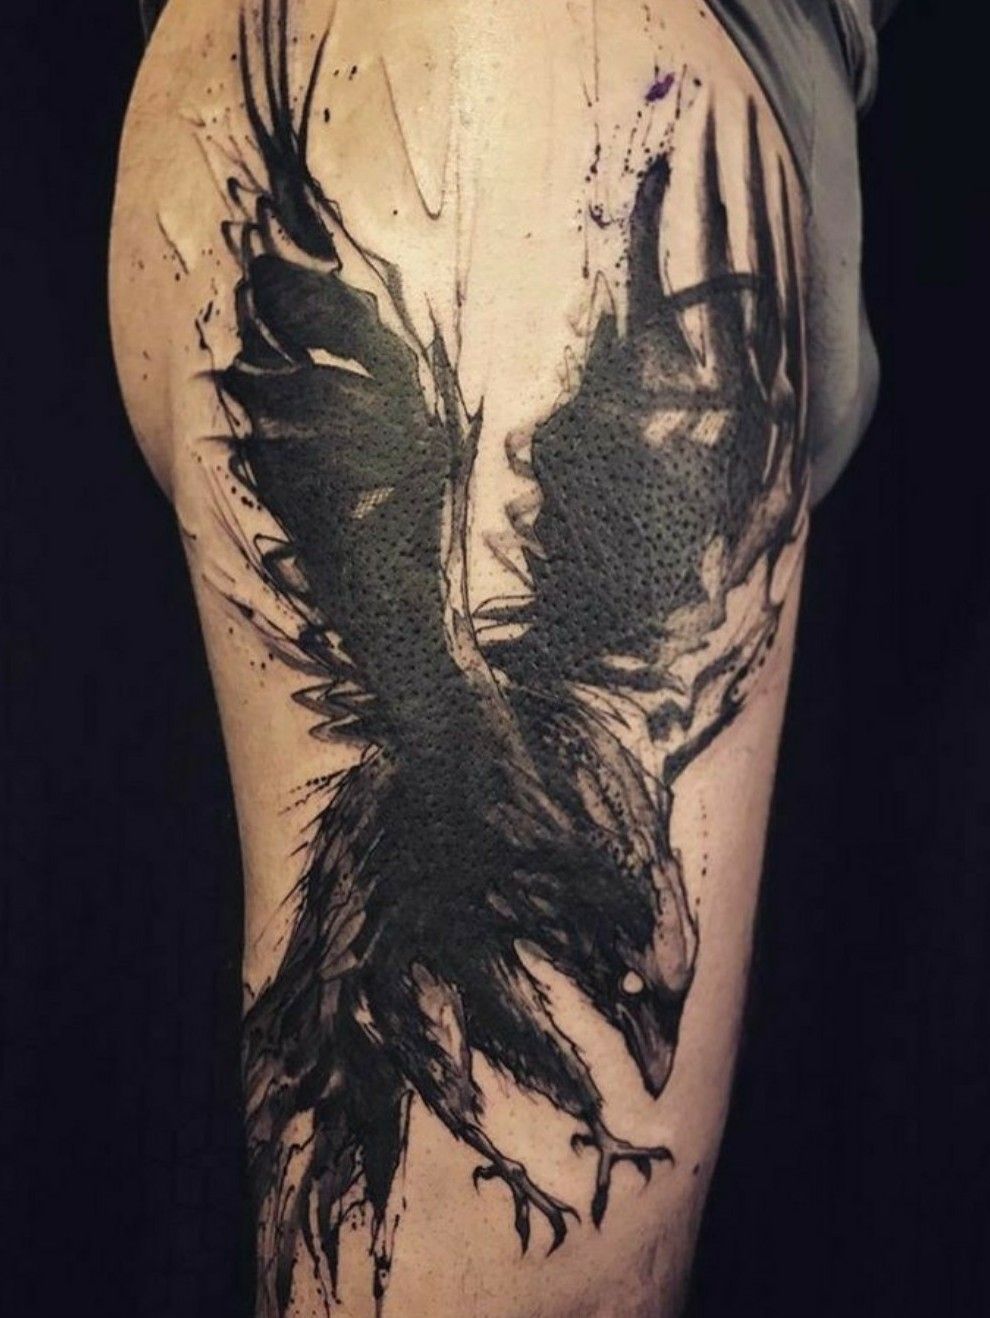 Crow watercolor Tattoo by KatyLipscomb on DeviantArt